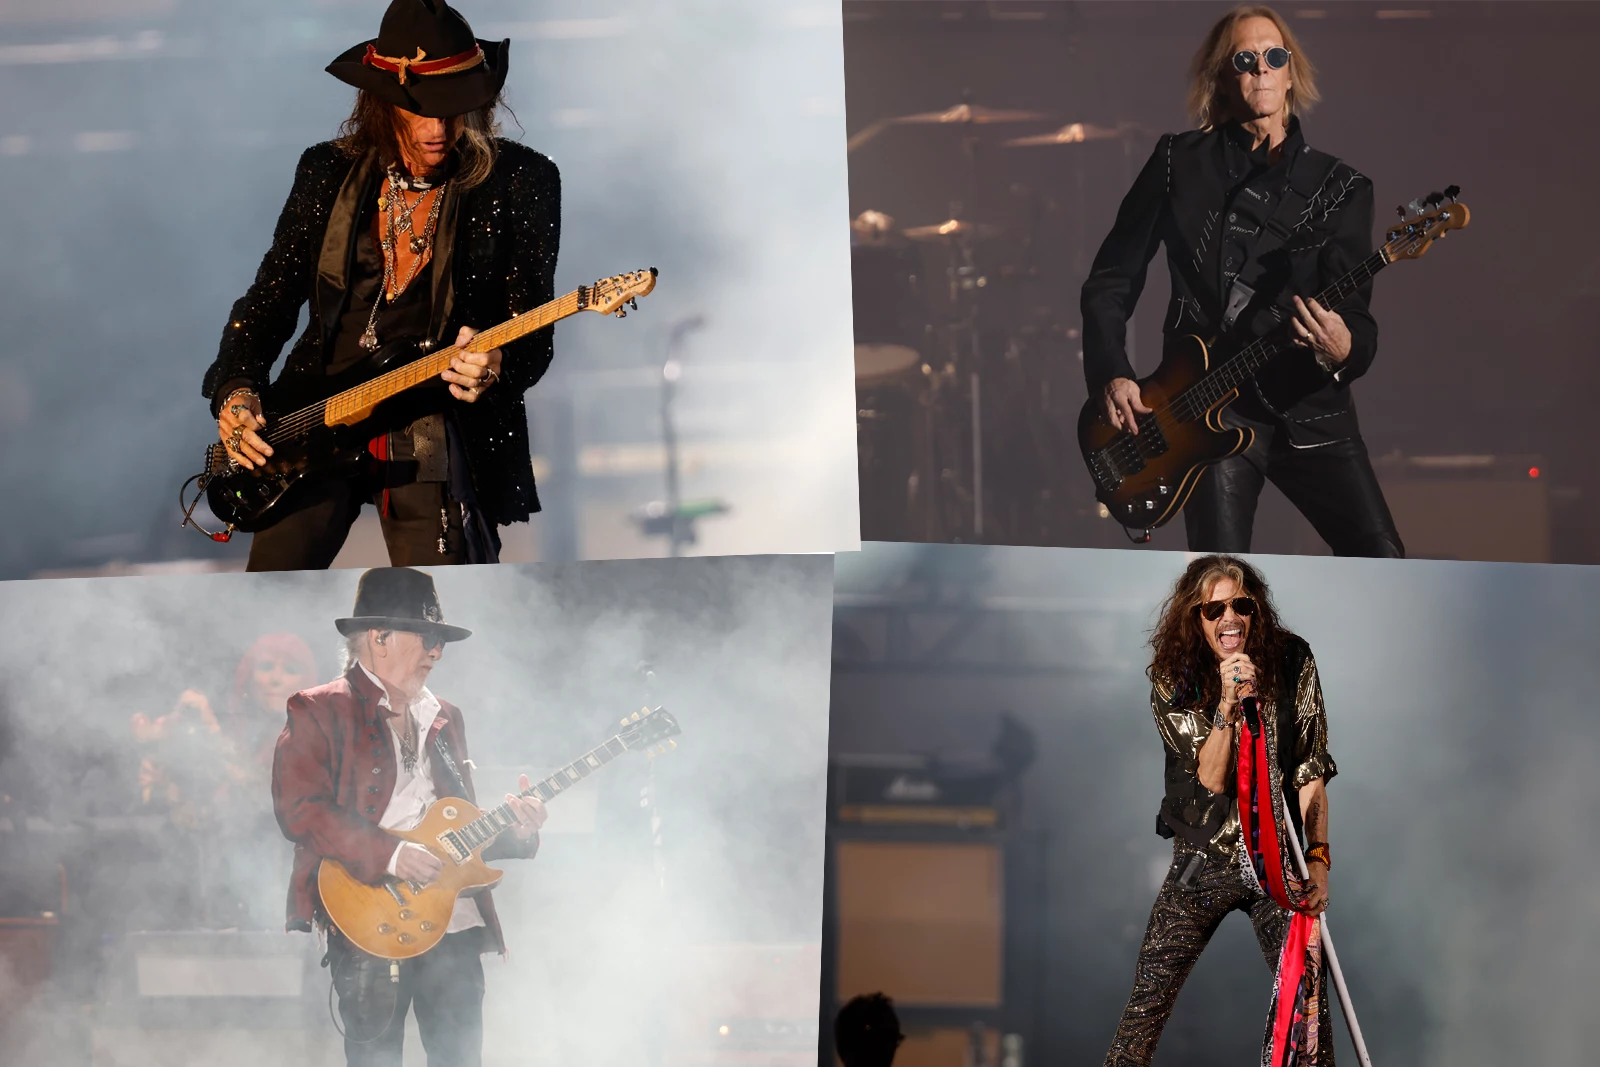 Aerosmith on X: #AeroHistory: August 14th 2010 - #Aerosmith along with The  J. Geils Band ROCK the hometown crowd at Fenway Park in Boston,  Massachusetts!  / X